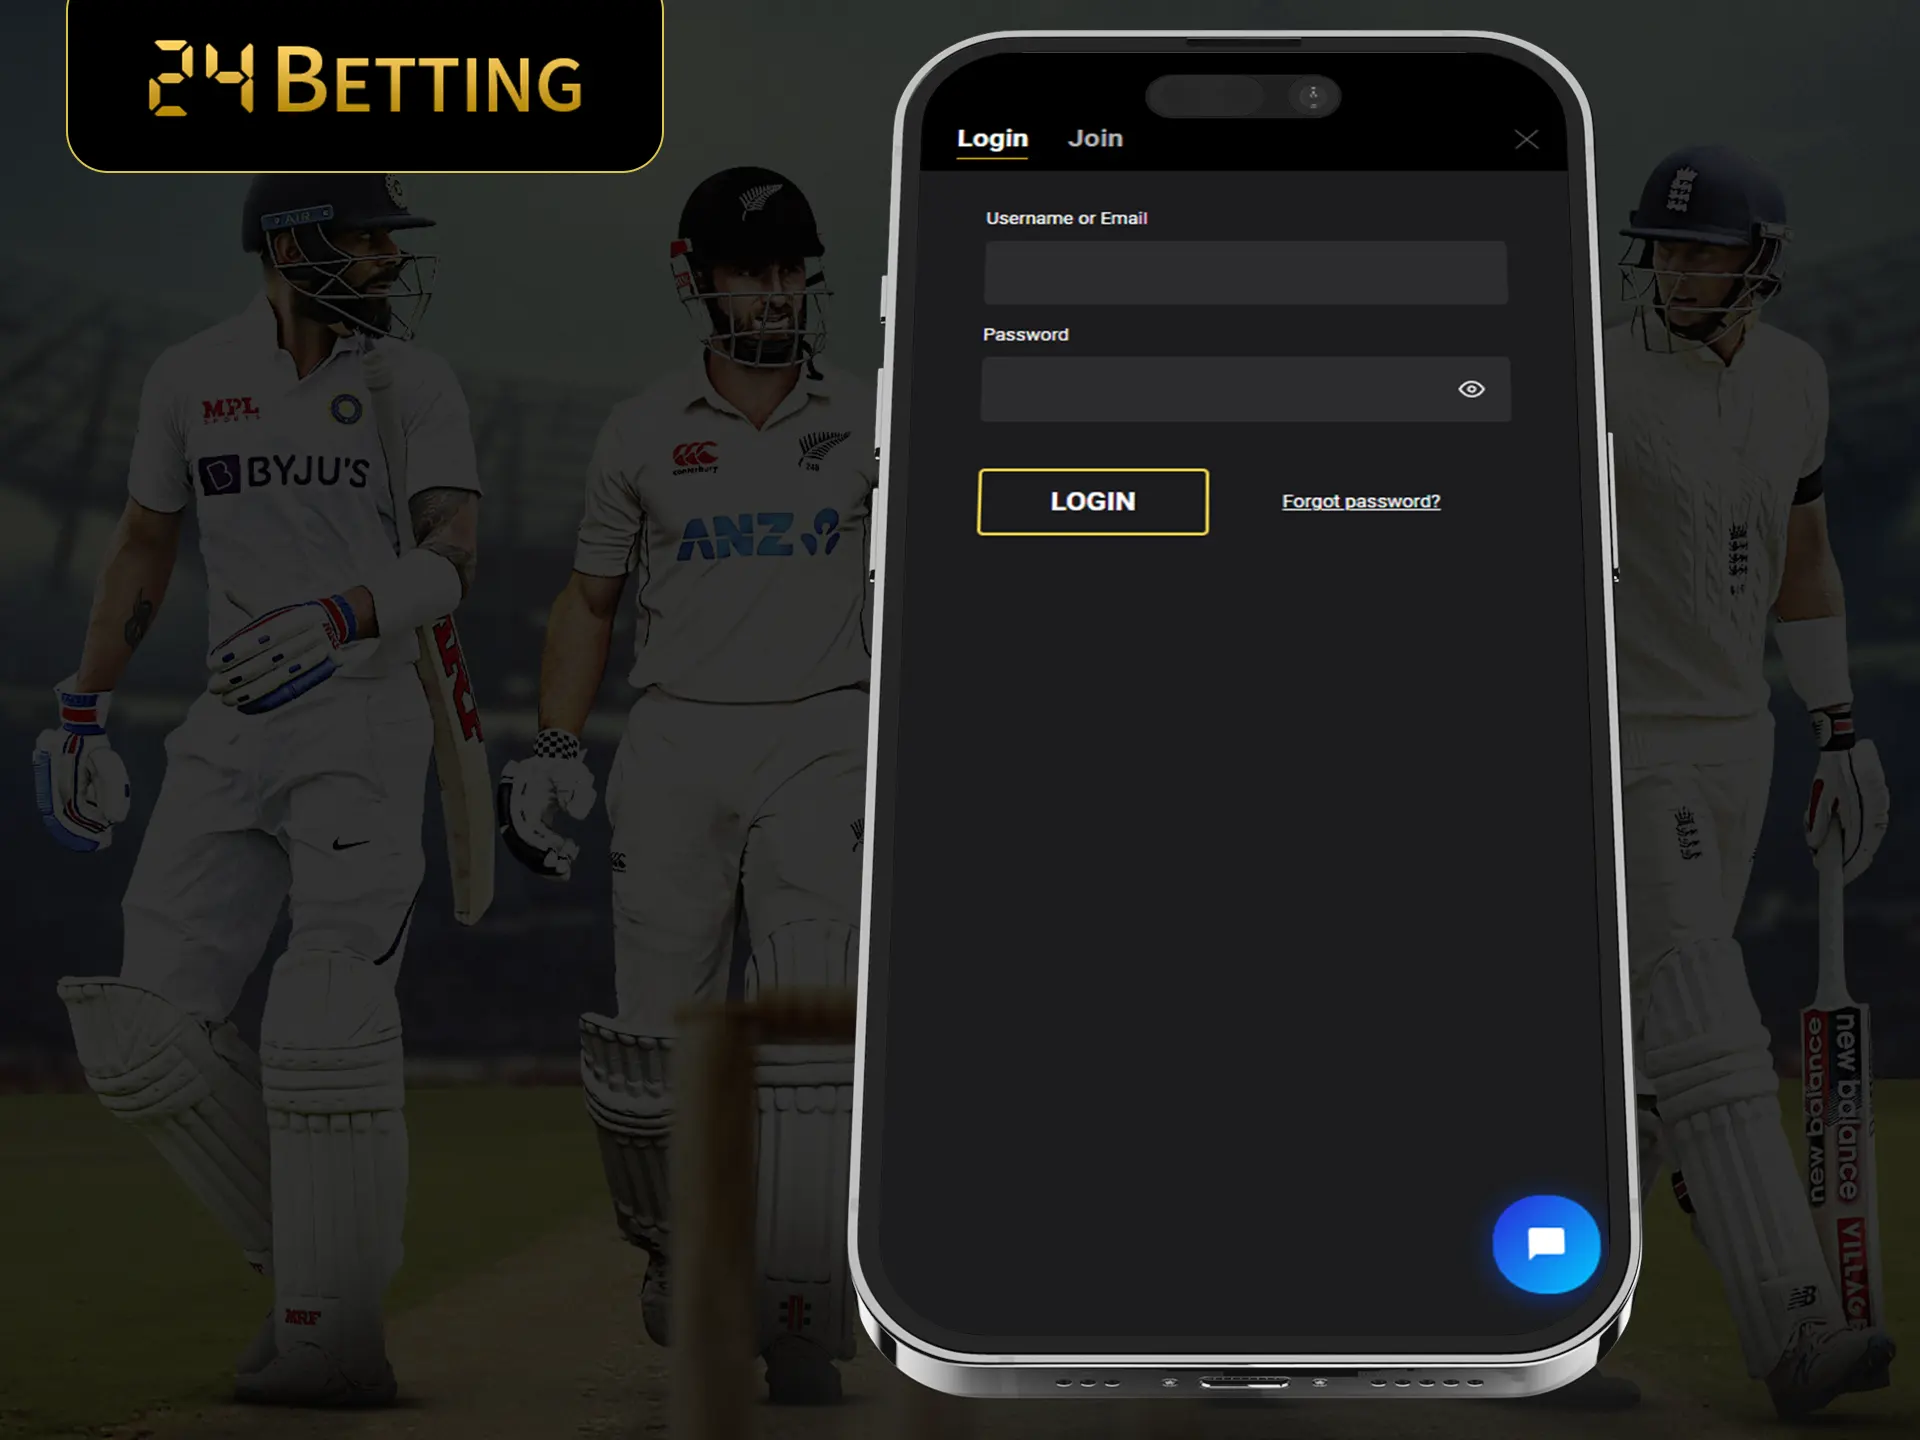 Log in to your account on the 24Betting app.